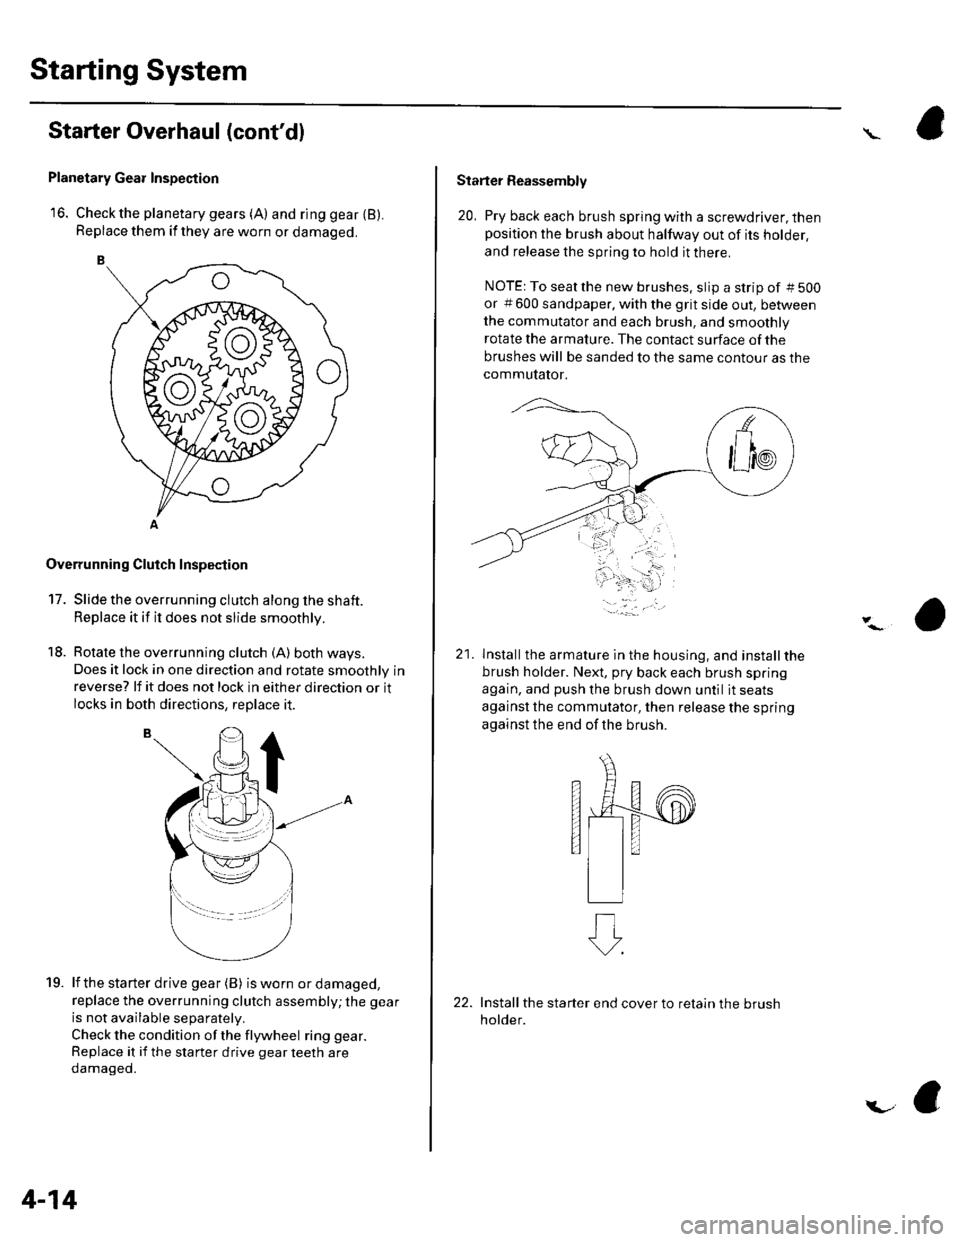 HONDA CIVIC 2002 7.G Workshop Manual Starting System
Starter Overhaul (contdl
Planetary Gear Inspection
16. Check the planetary gears (A) and ring gear {B).Replace them if they are worn or damaged.
Overrunning Cluich Inspection
17. Slid